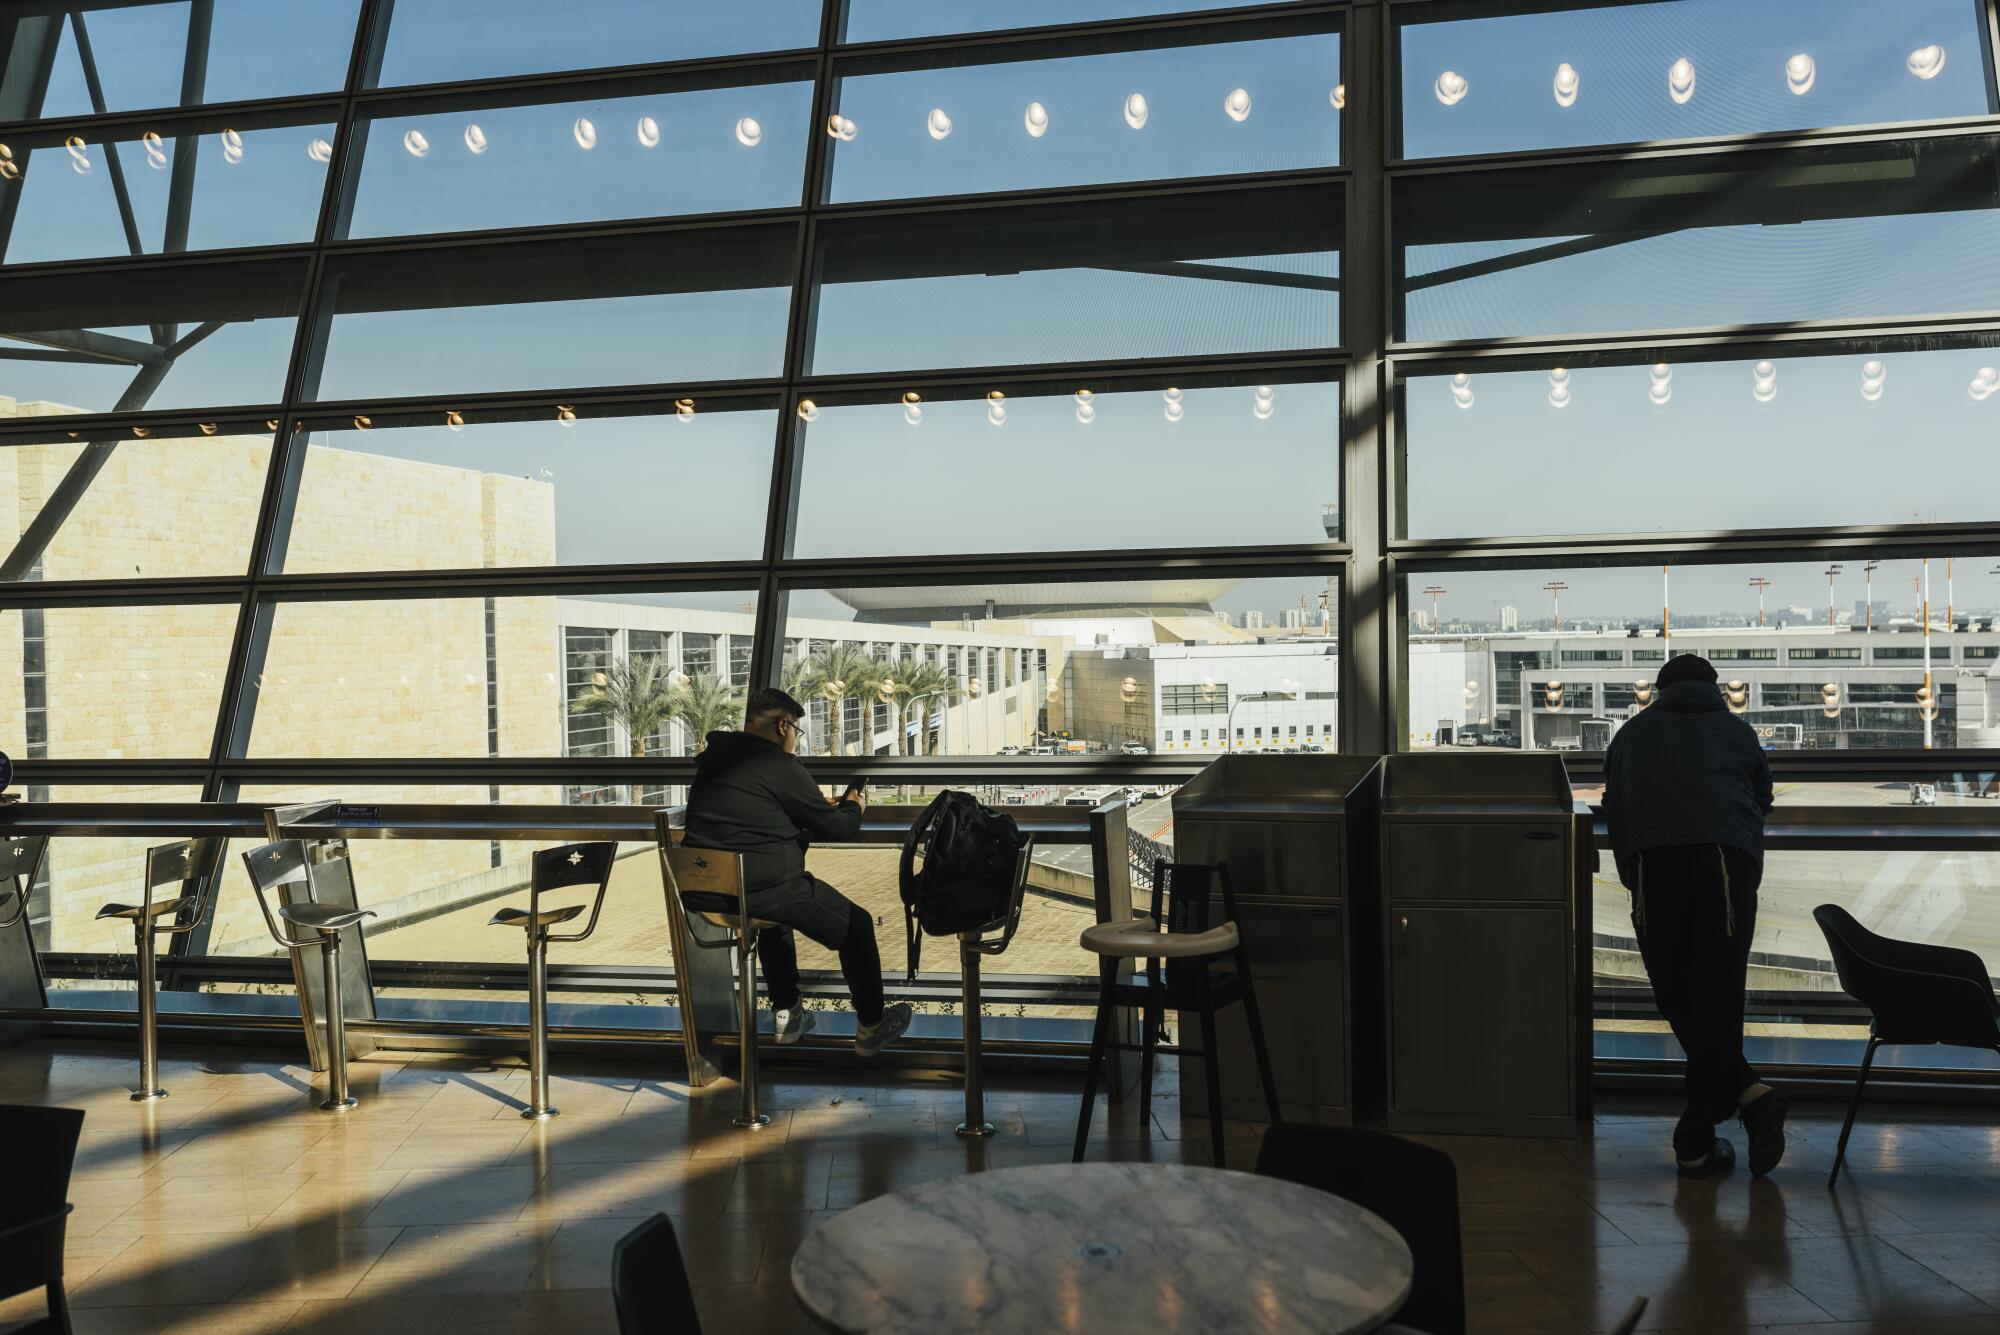 A man sits in an airport lounge with glass windows facing buildings